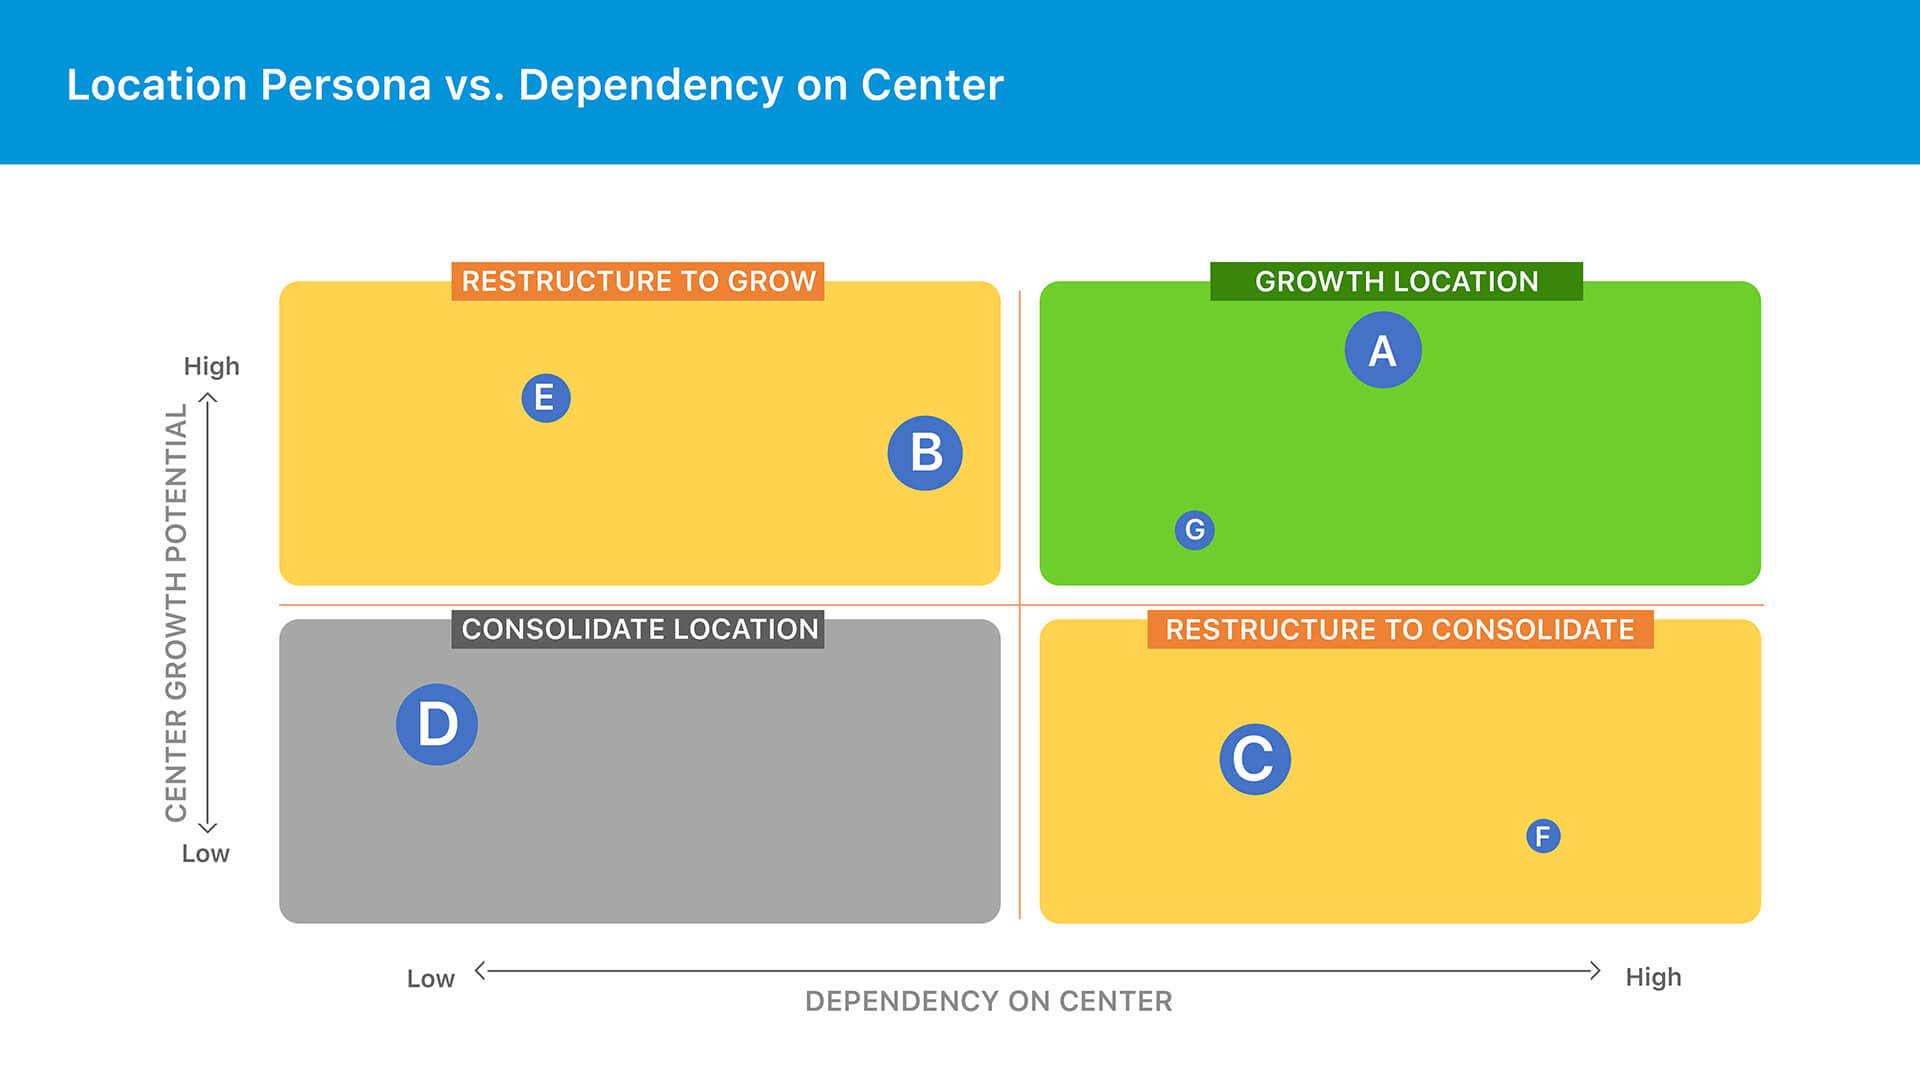 Location persona vs dependency on center